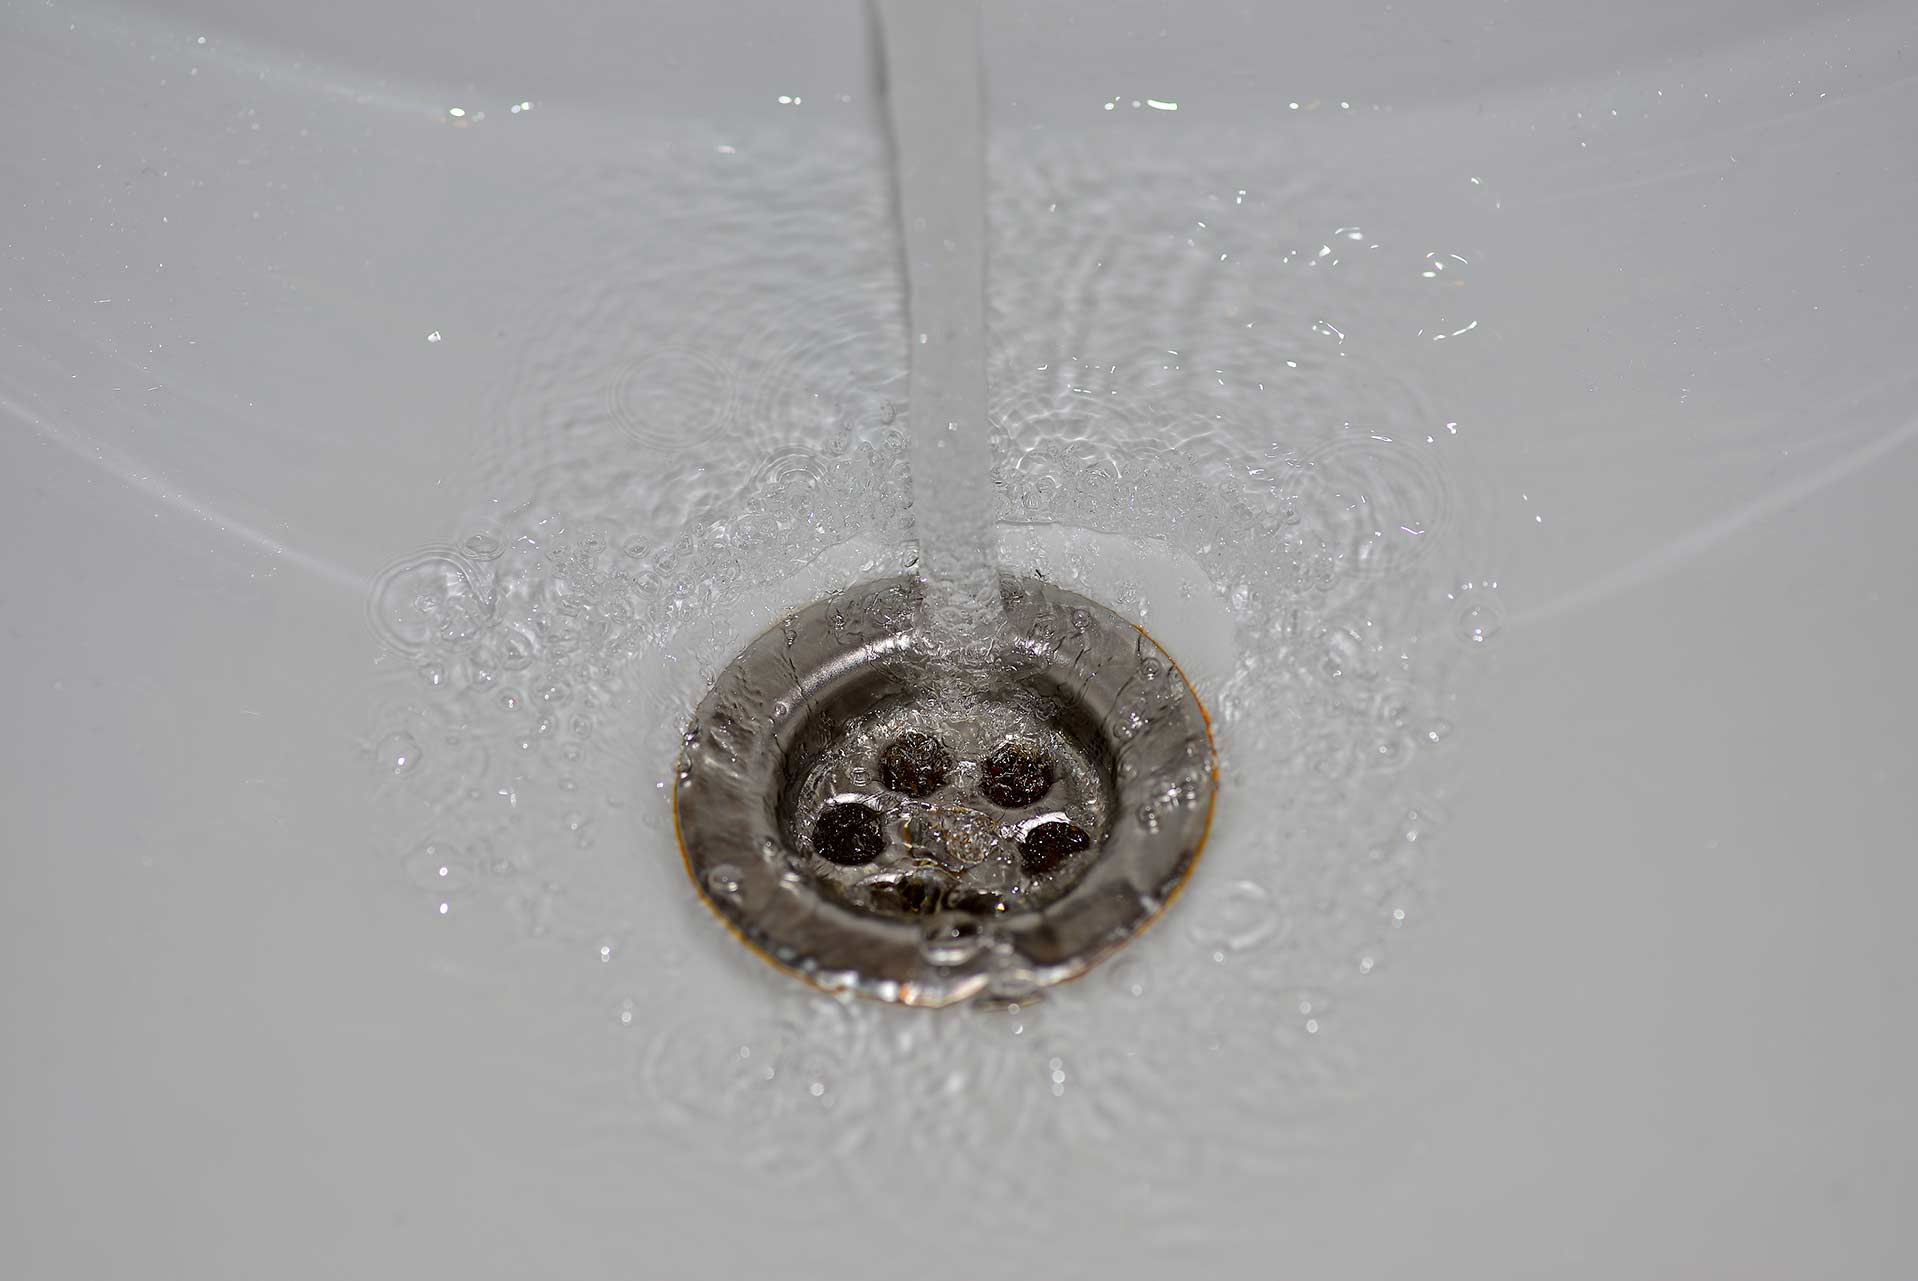 A2B Drains provides services to unblock blocked sinks and drains for properties in Garforth.